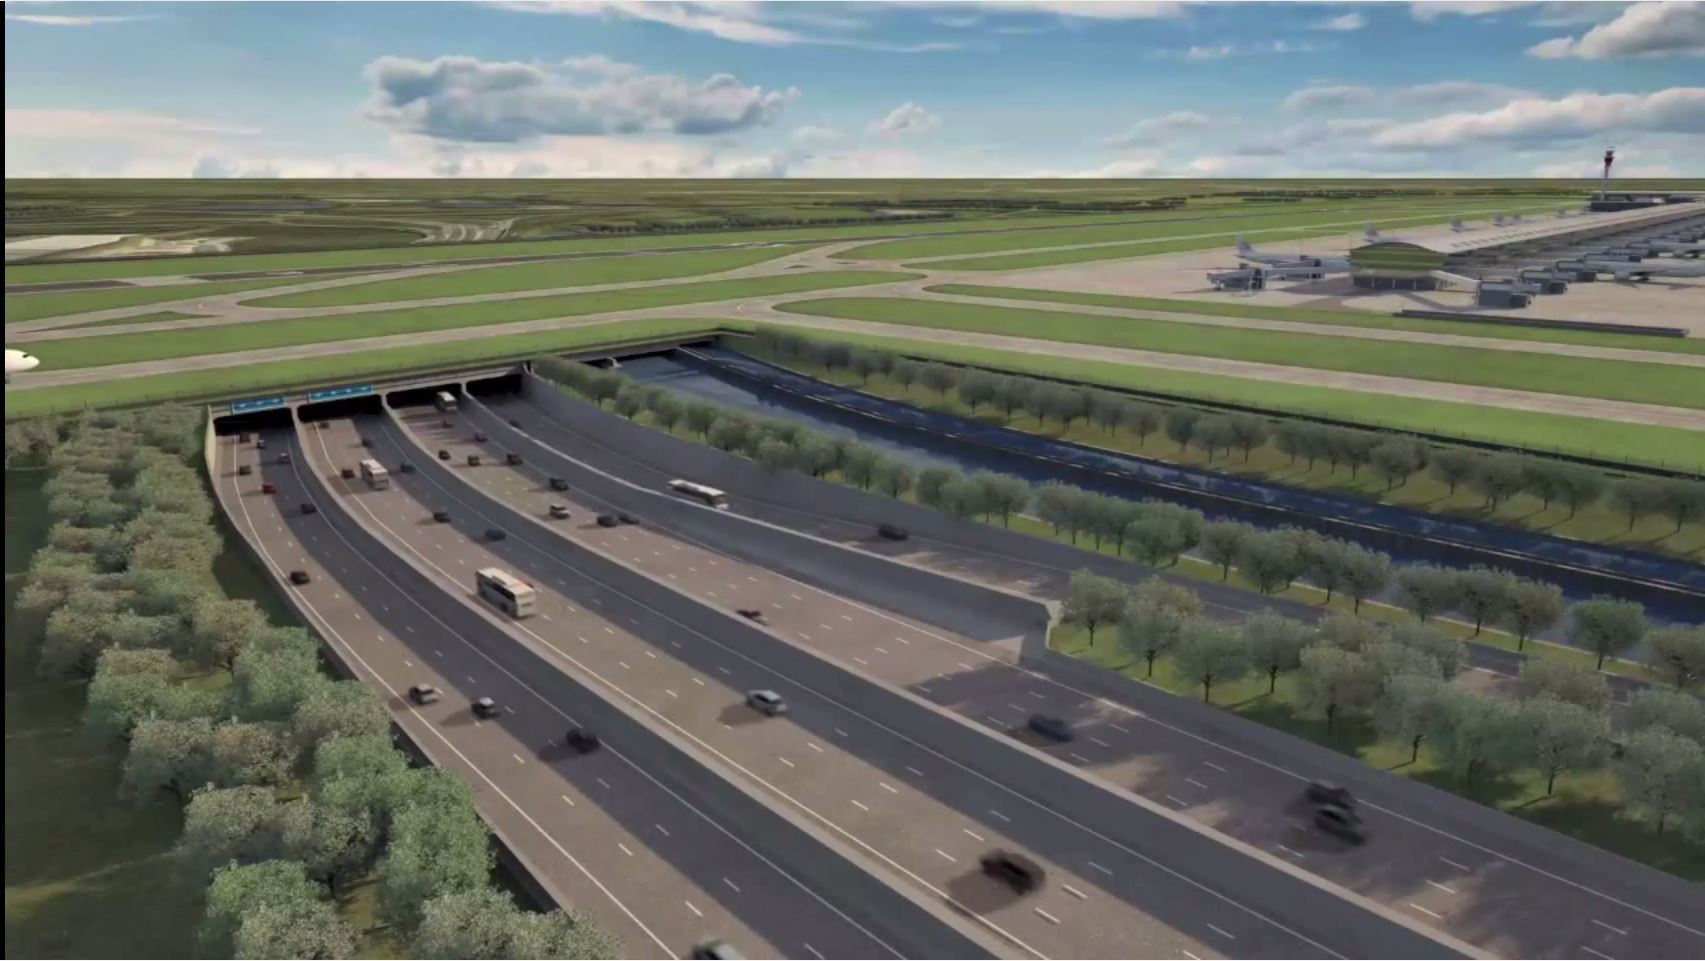 London Heathrow: Improved 14-lane M25 with Expansion